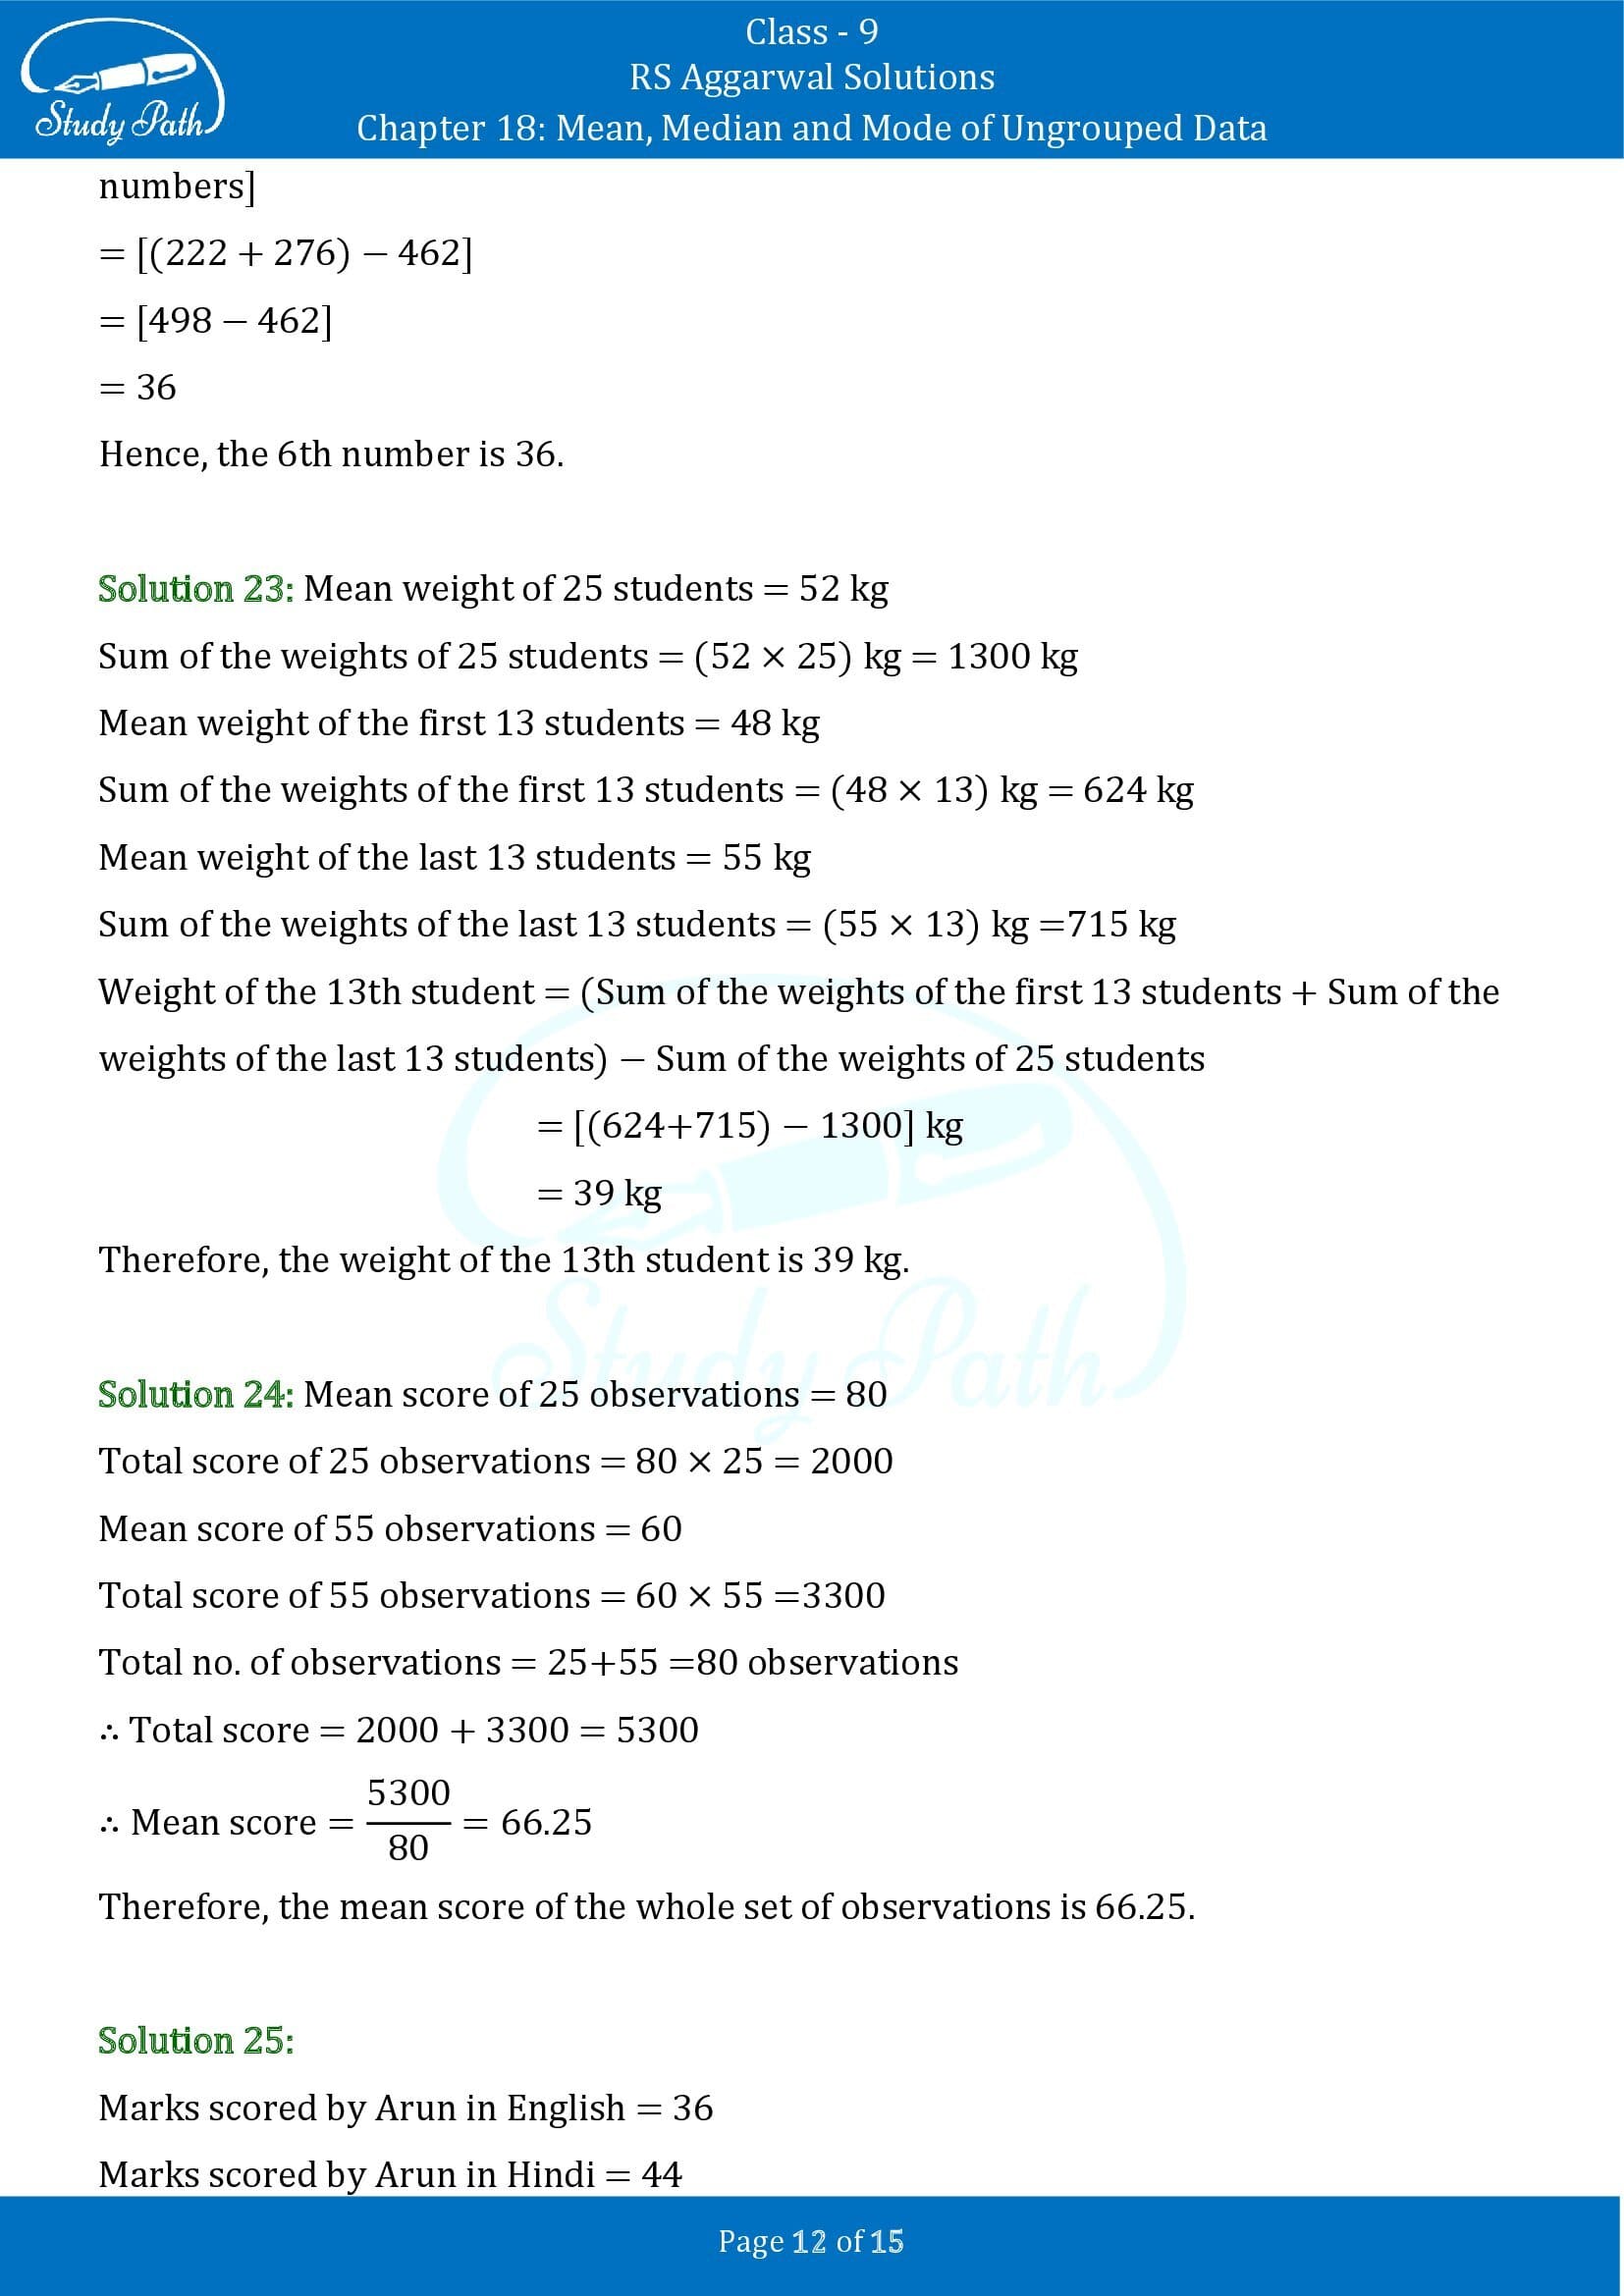 RS Aggarwal Solutions Class 9 Chapter 18 Mean Median and Mode of Ungrouped Data Exercise 18A 00012